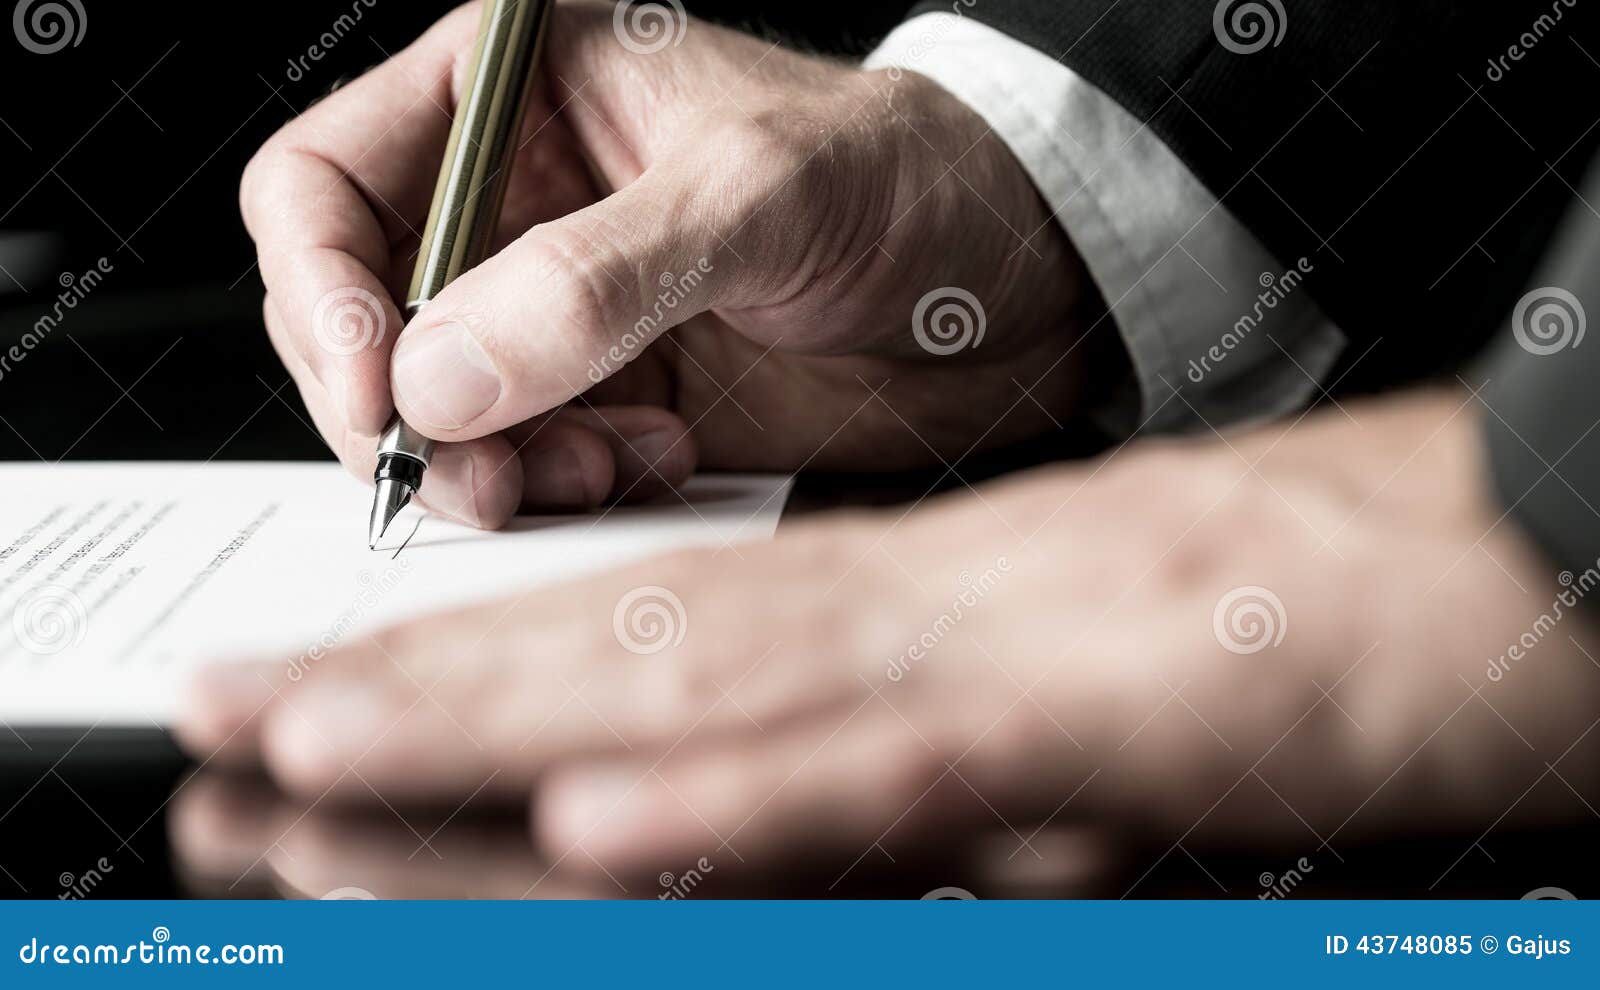 desaturated image of signing a contract